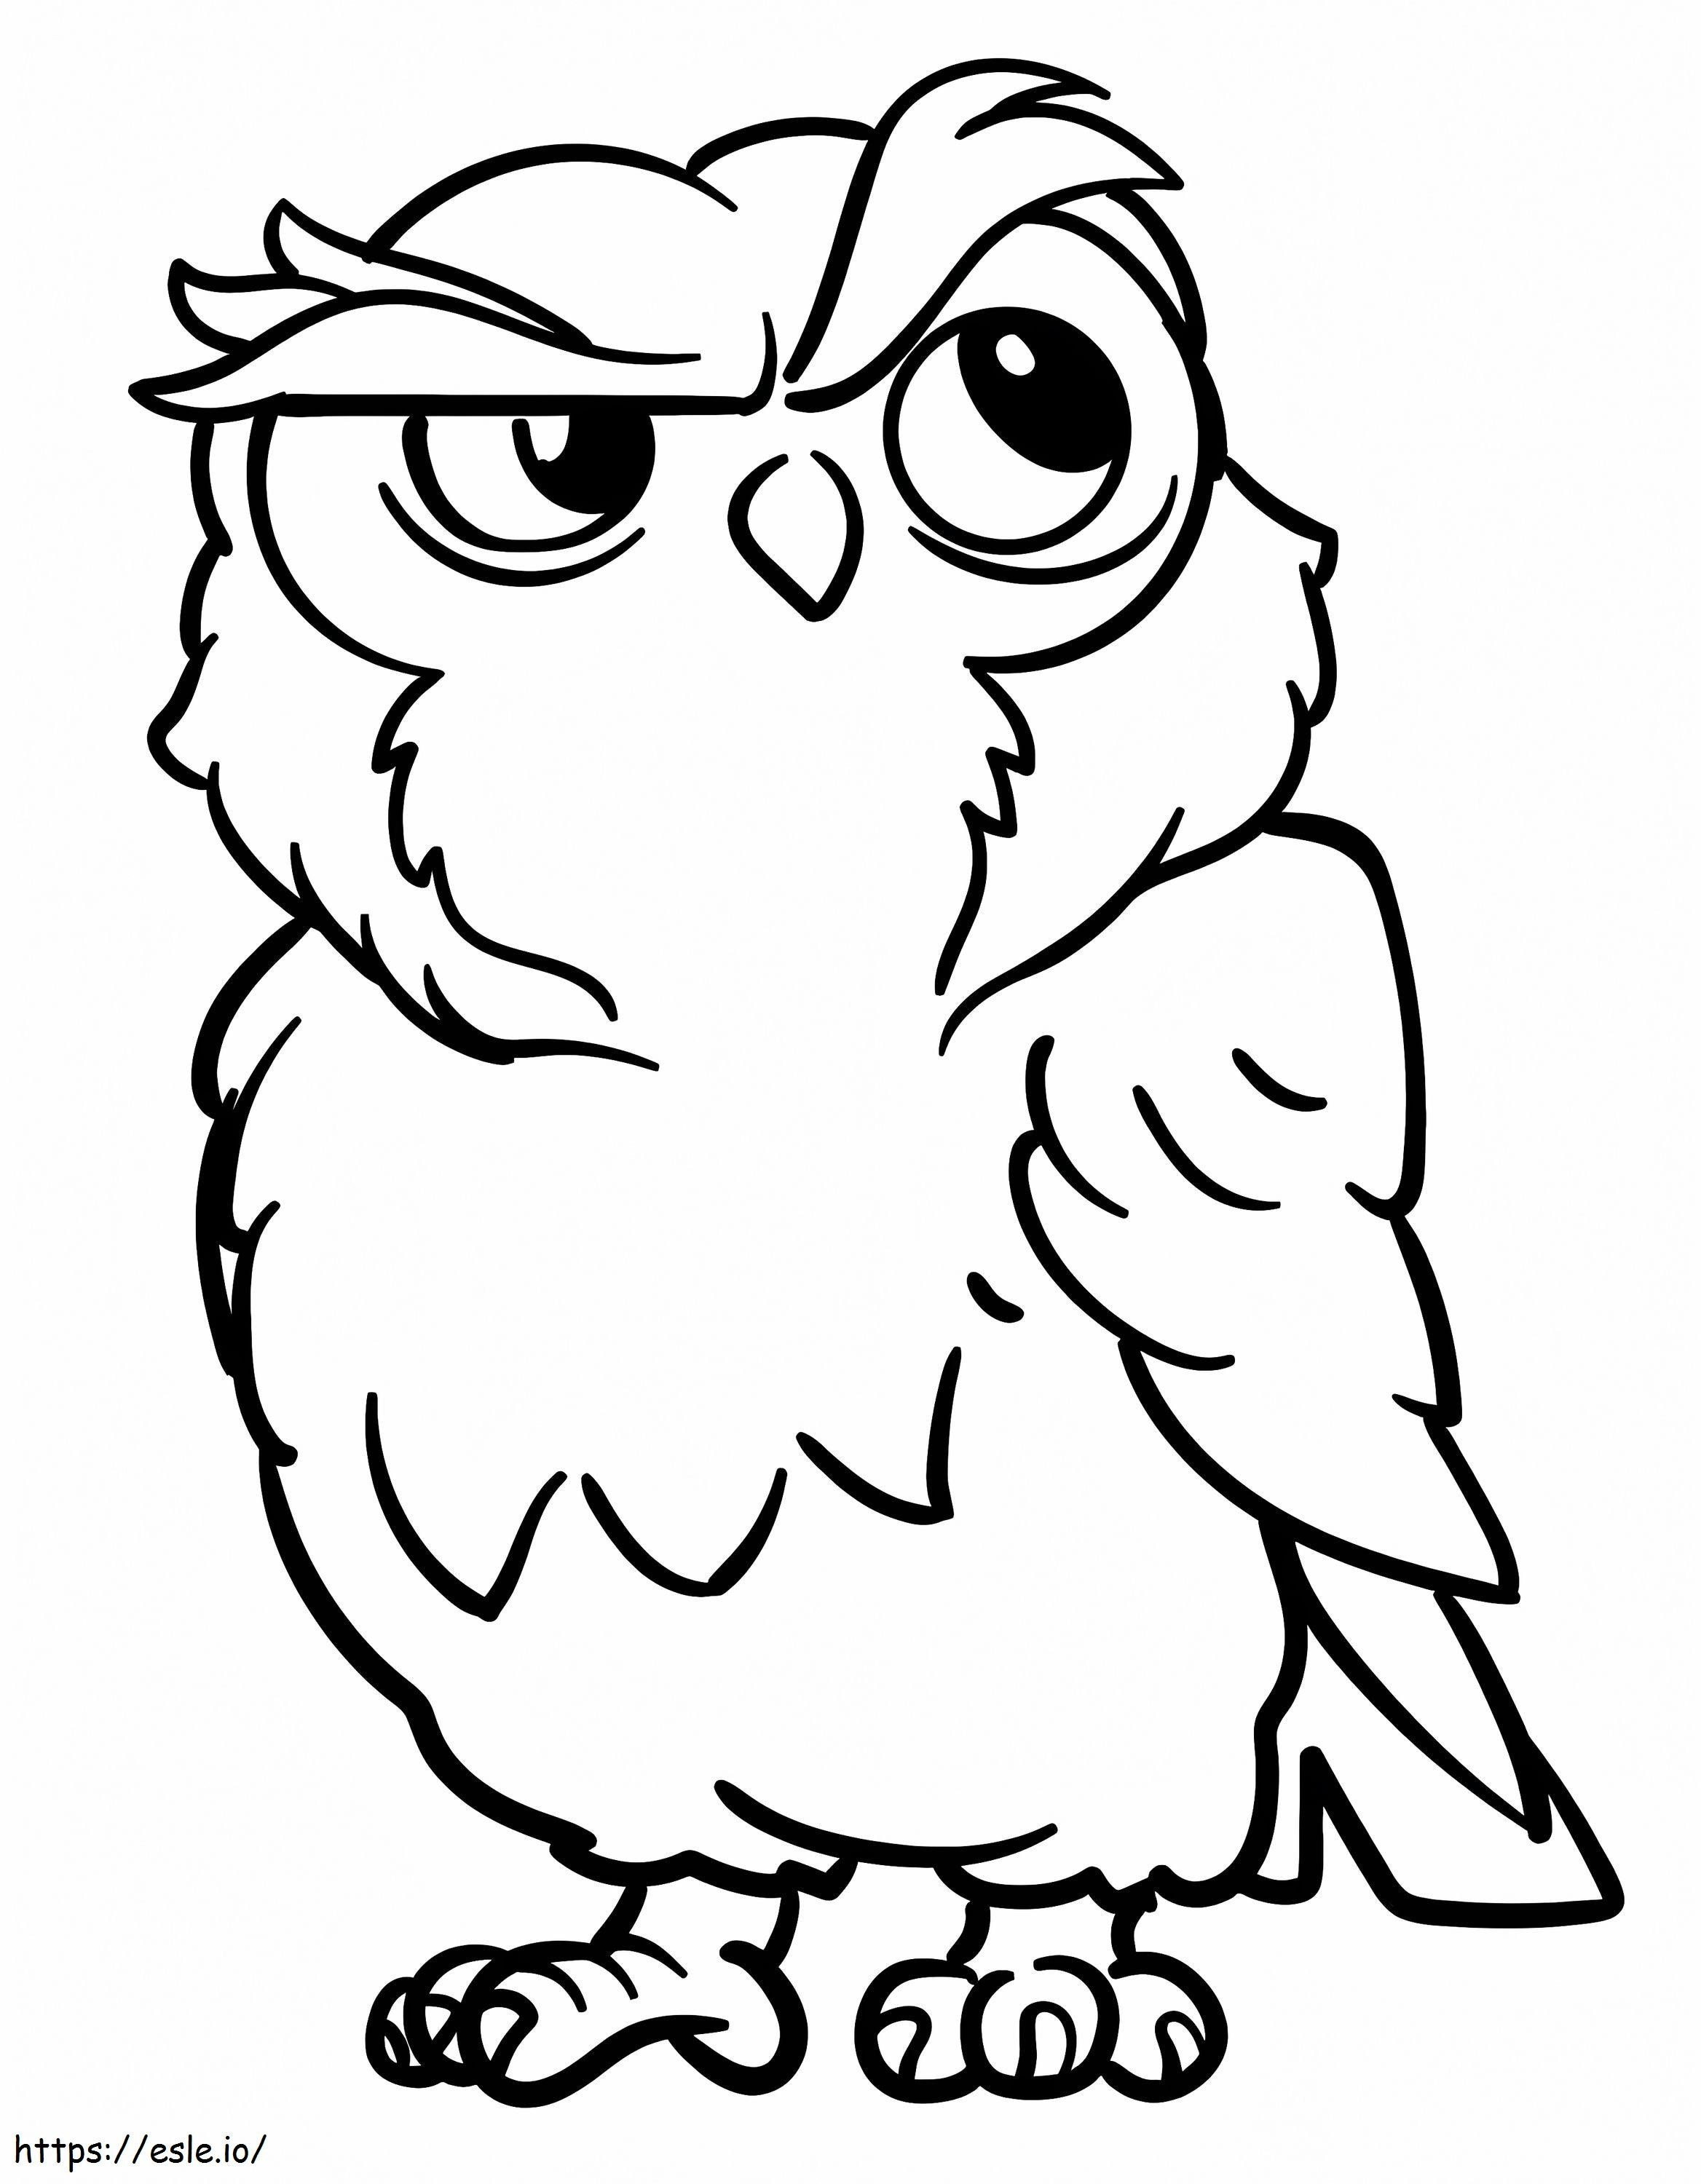 Thinking Owl coloring page